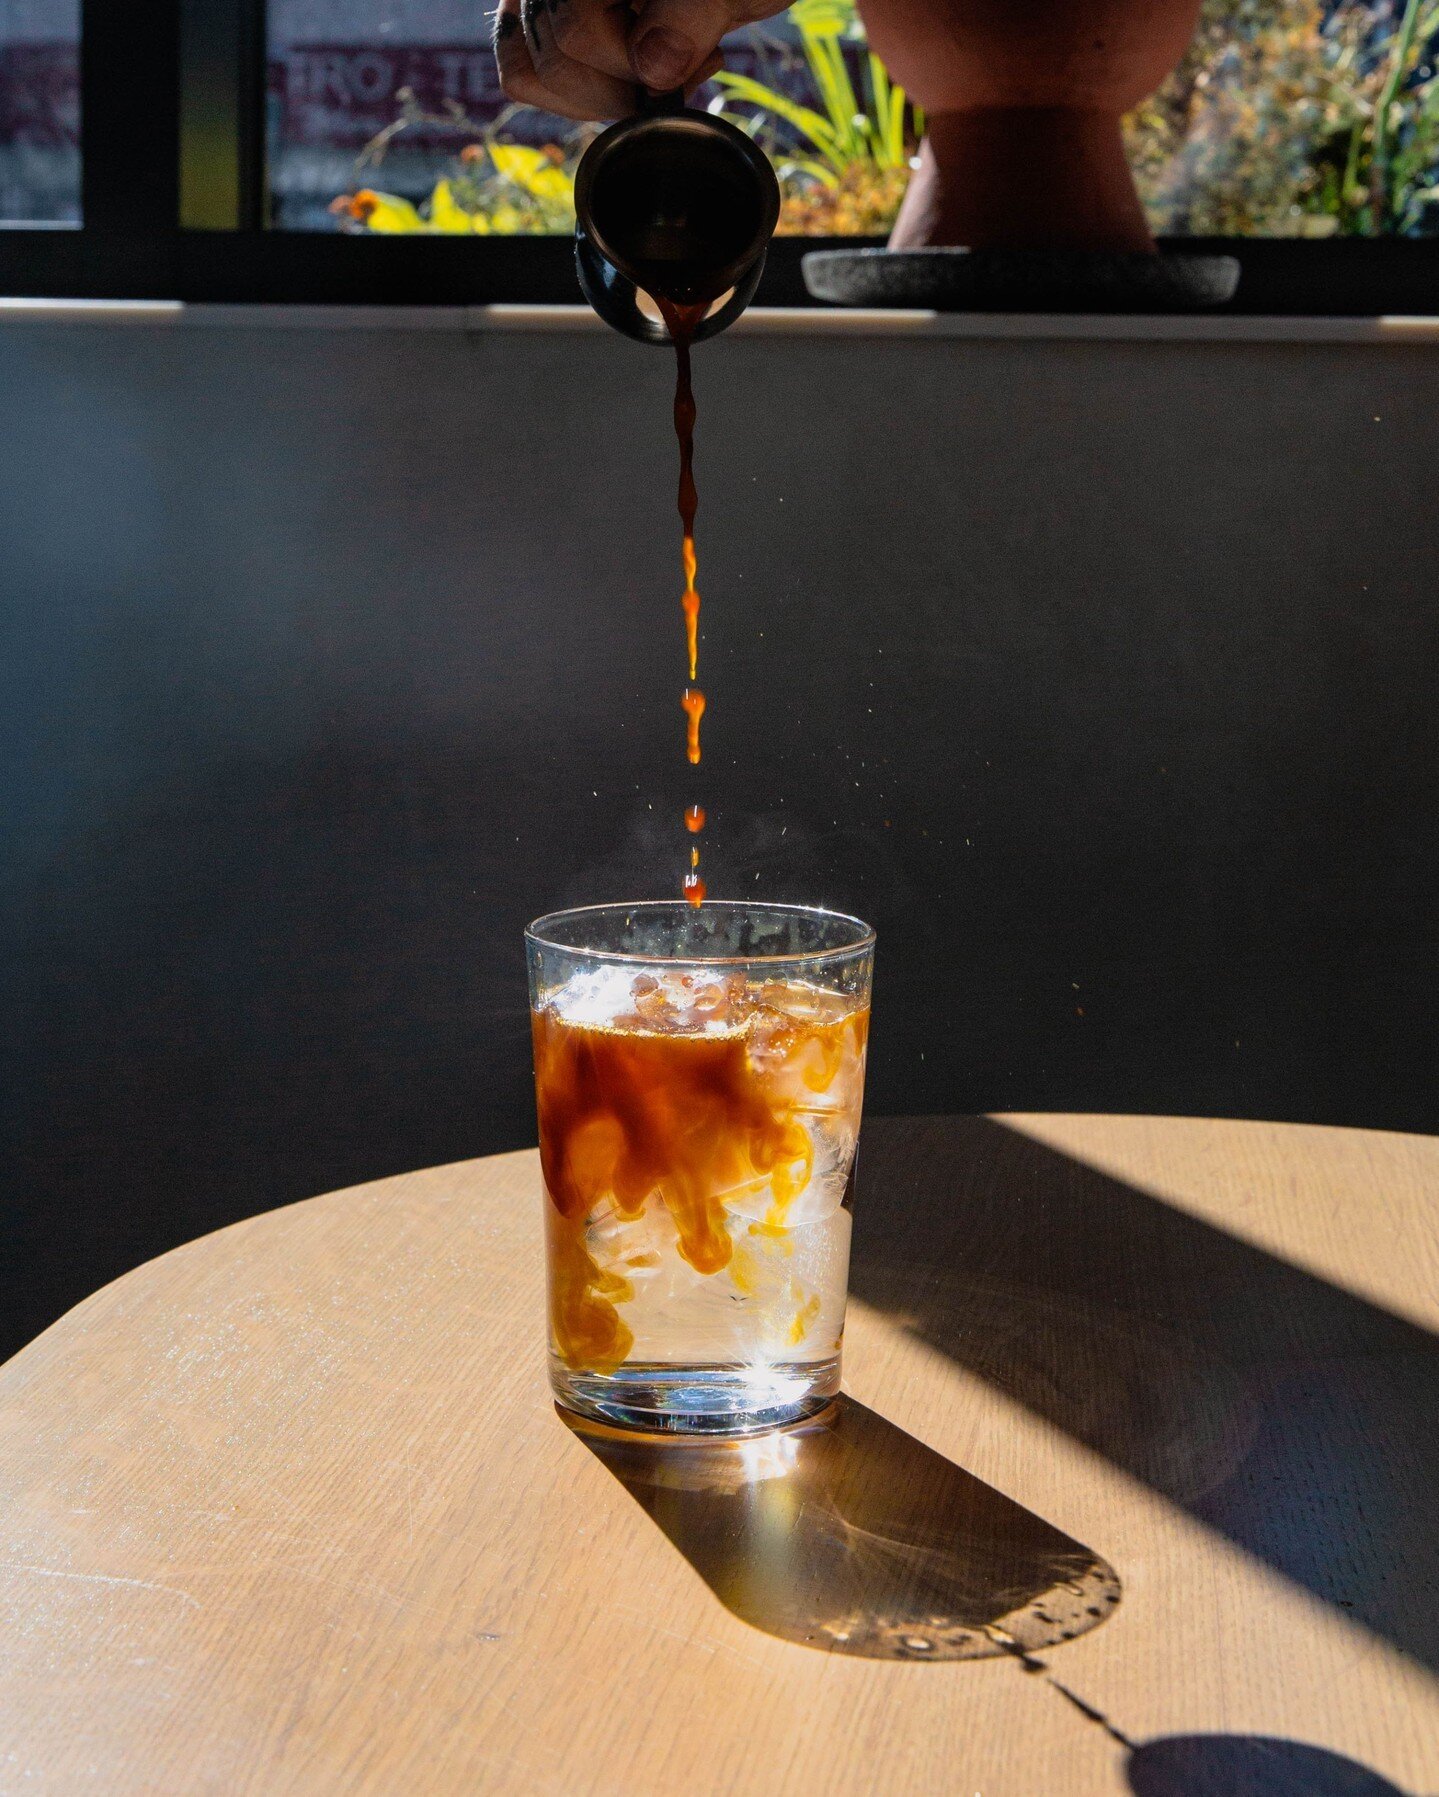 Let us satisfy your iced coffee cravings. Serving up @Monogramco so you can get your caffeine fix!